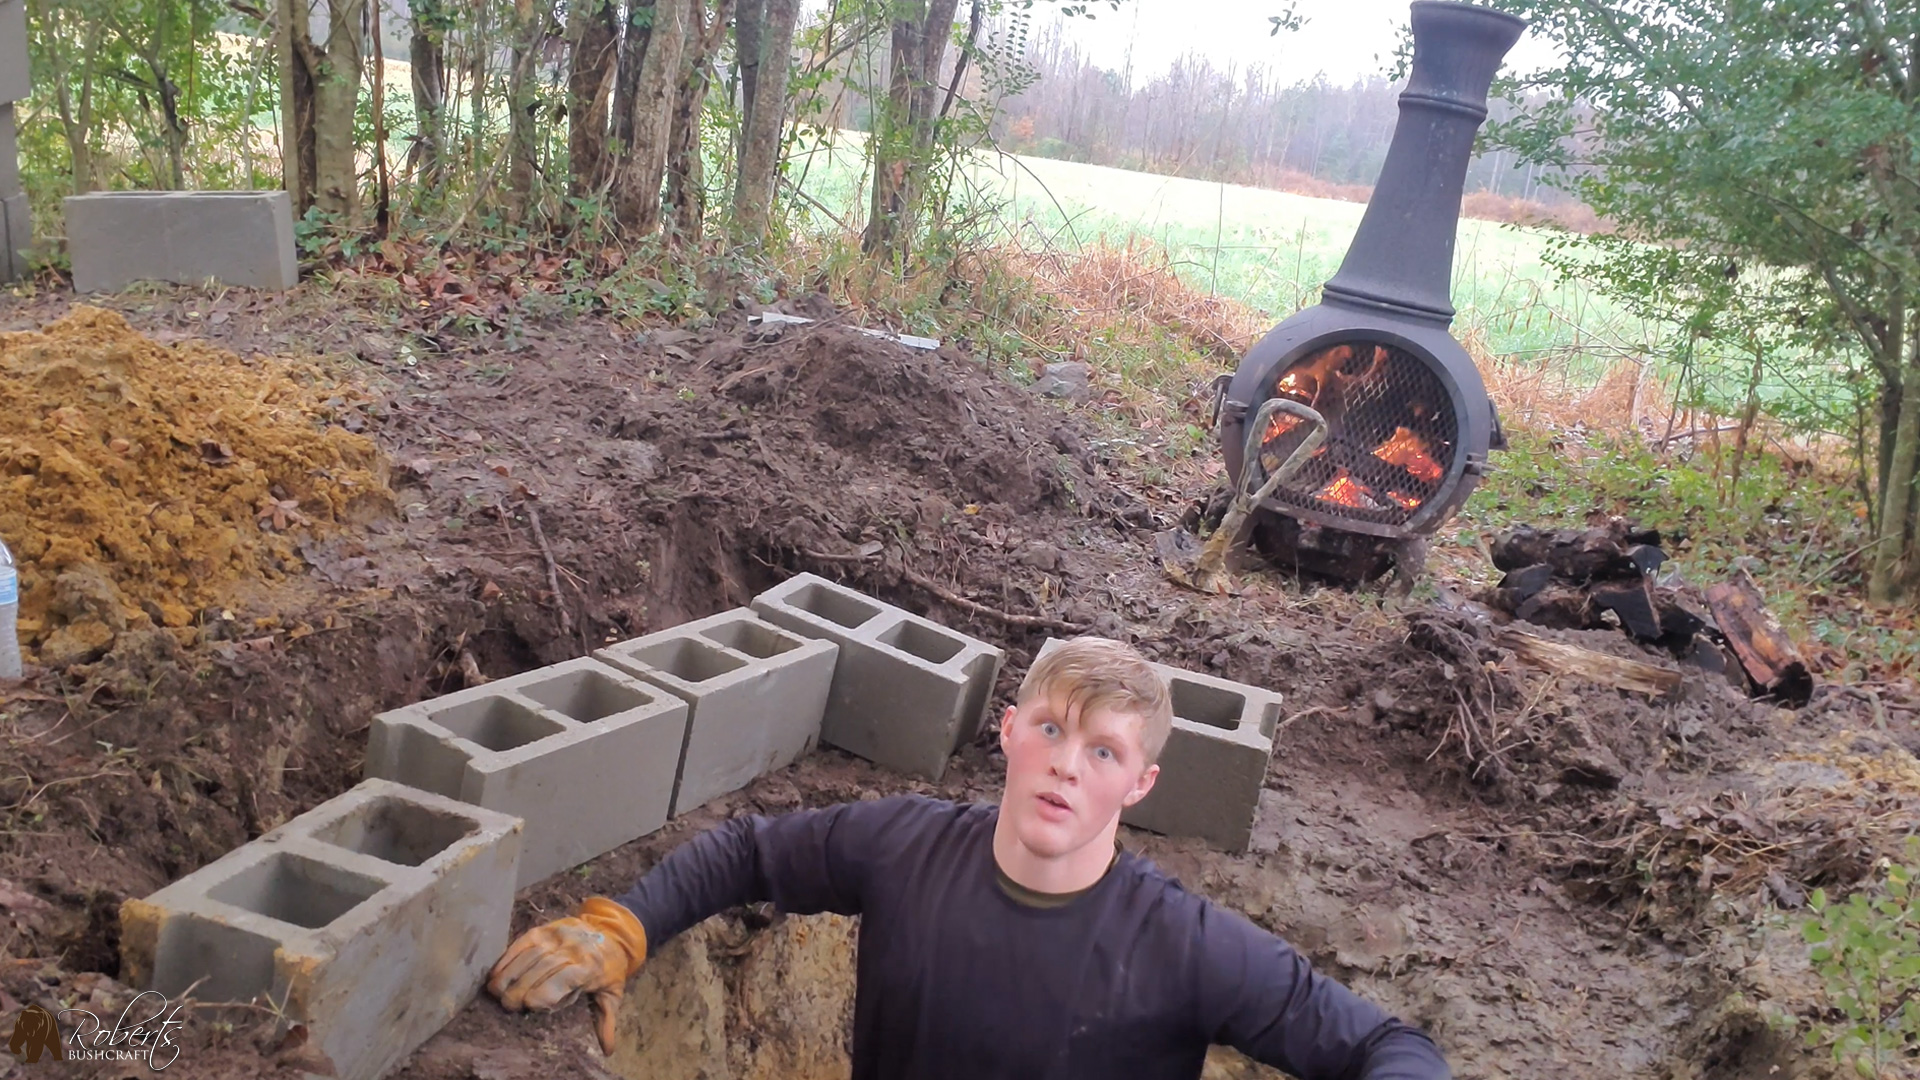 Digging an outhouse hole while raining